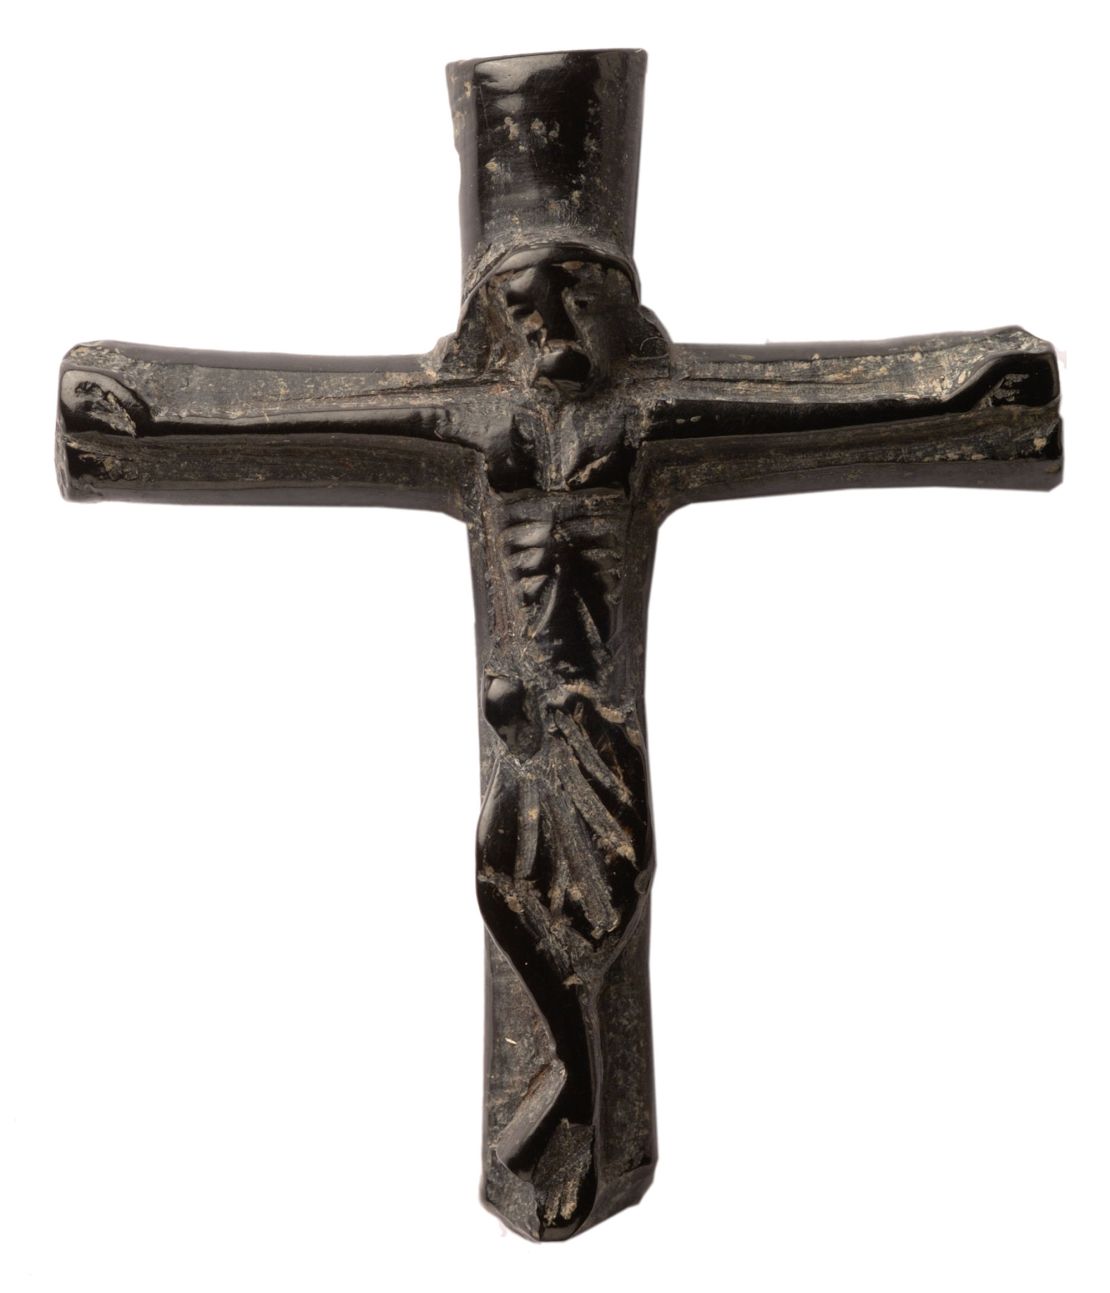 This crucifix, made from Whitby jet, was one of the few items of value found in the graves.